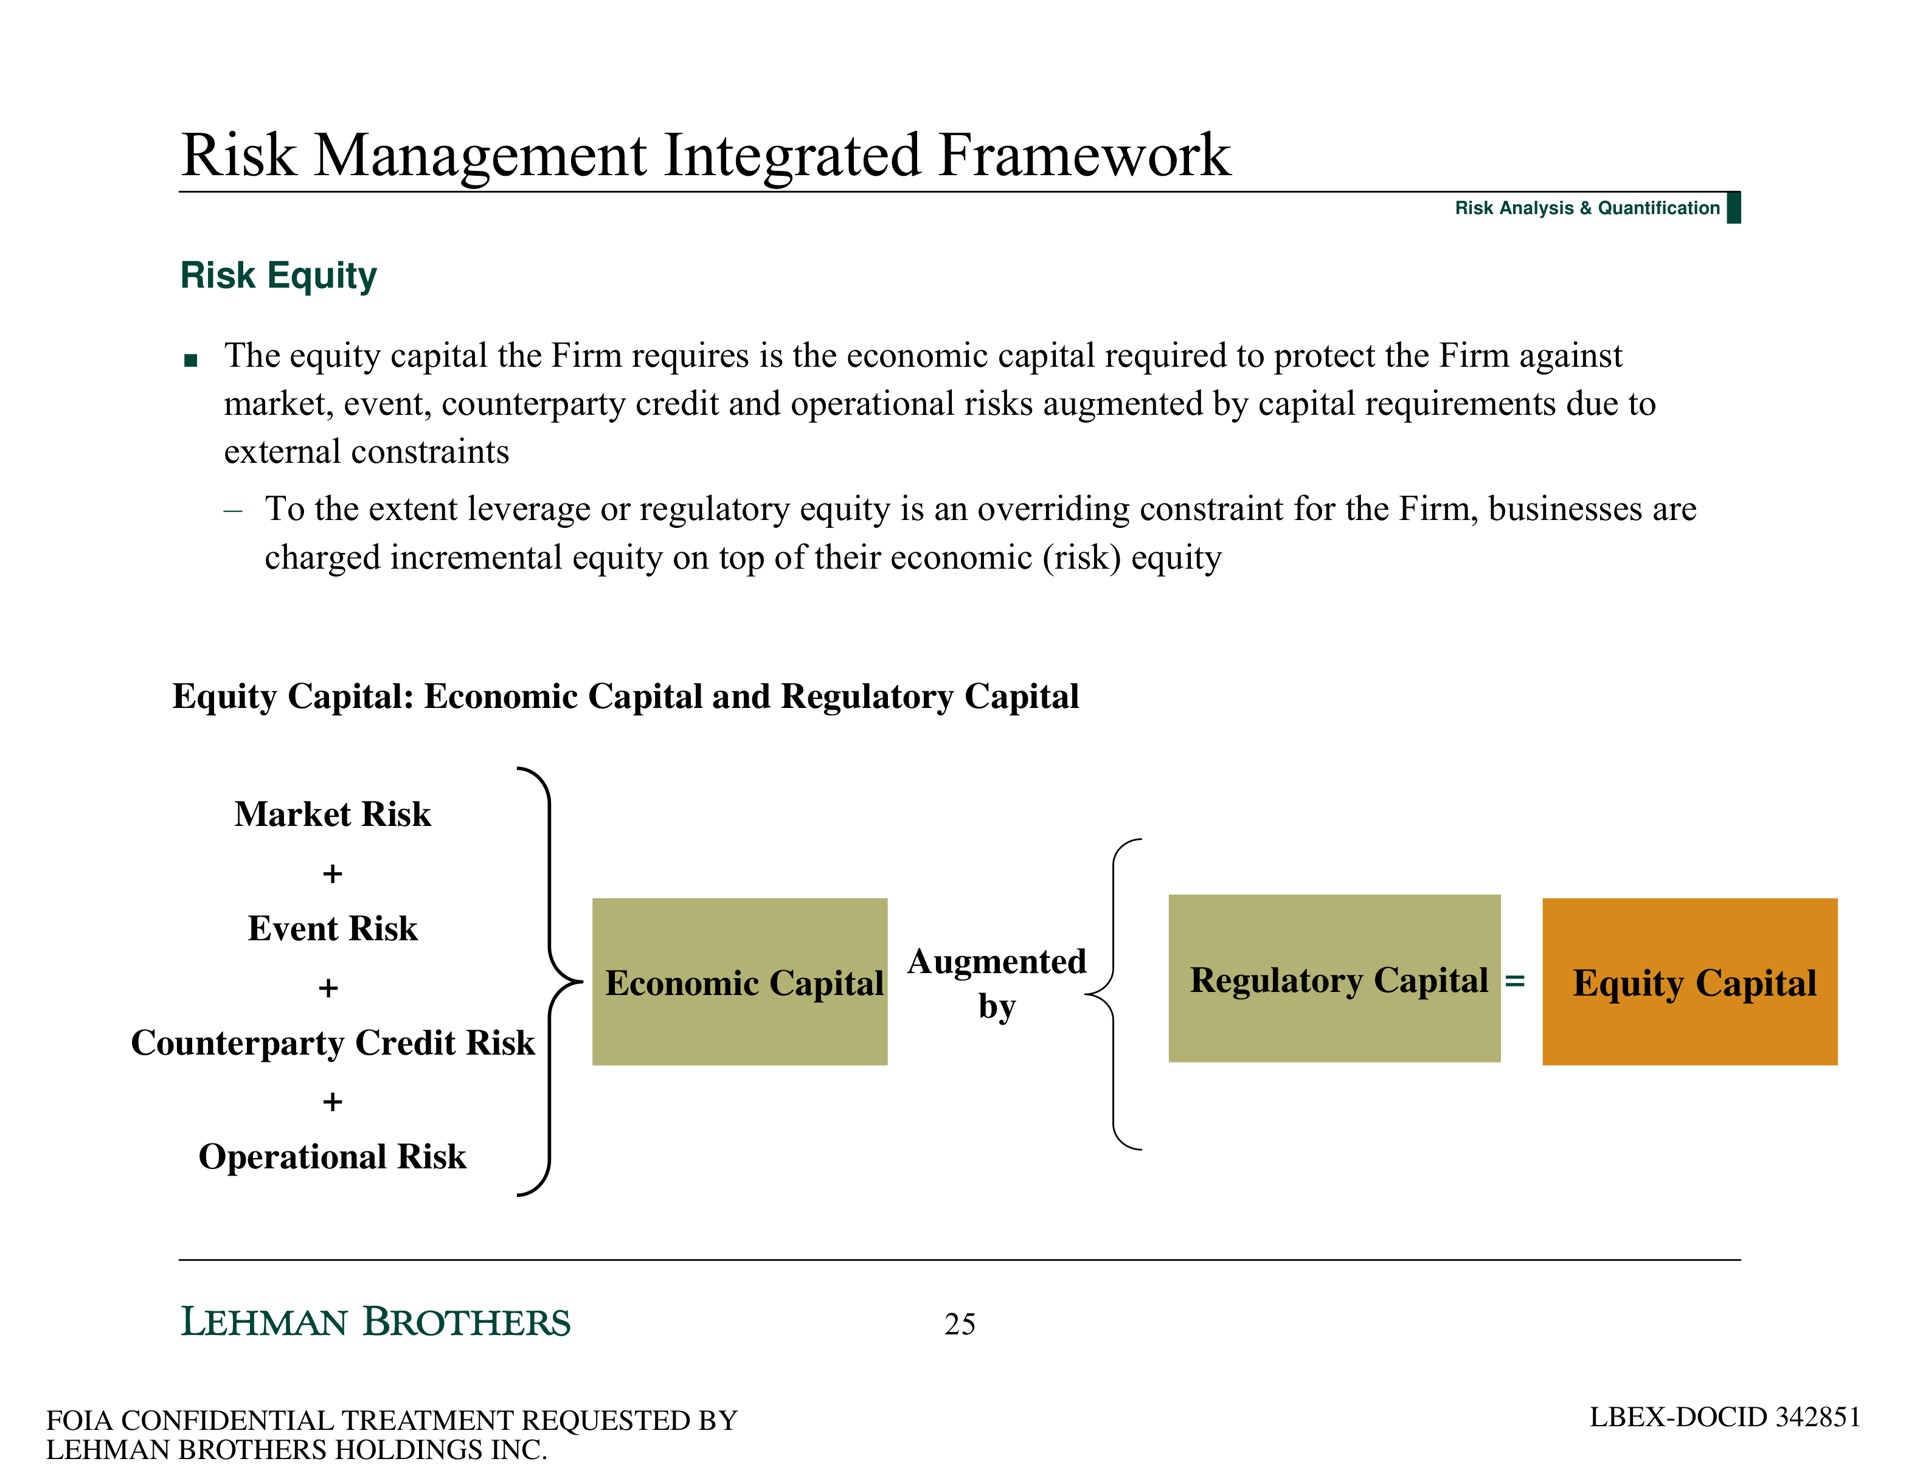 risk management integrated framework risk equity the equity capital the firm requires is the economic capital required to protect the firm against market event credit and operational risks augmented by capital requirements due to external constraints to the extent leverage or regulatory equity is an overriding constraint for the firm businesses are charged incremental equity on top of their economic risk equity equity capital economic capital and regulatory capital market risk event risk credit risk operational risk economic capital augmented by regulatory capital equity capital | Lehman Brothers